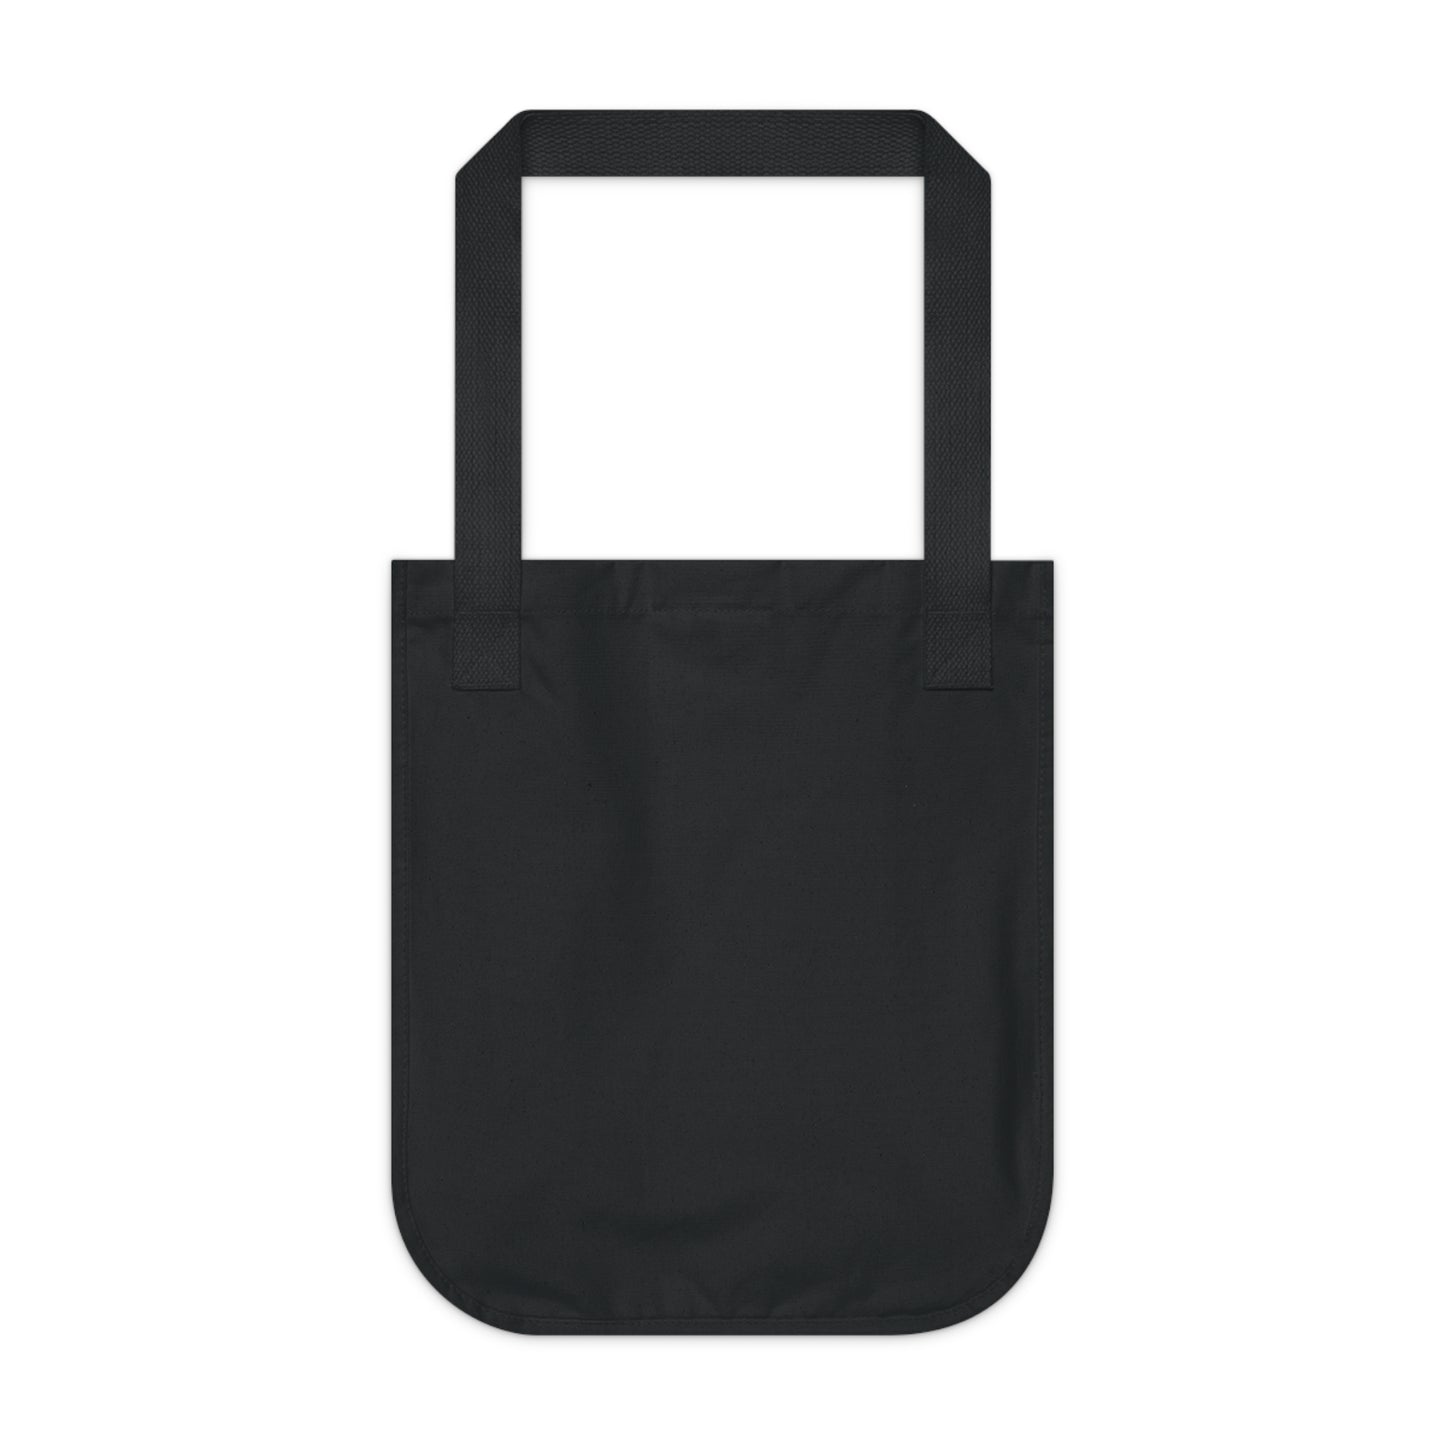 "In Colorful Minimalism" - Bam Boo! Lifestyle Eco-friendly Tote Bag